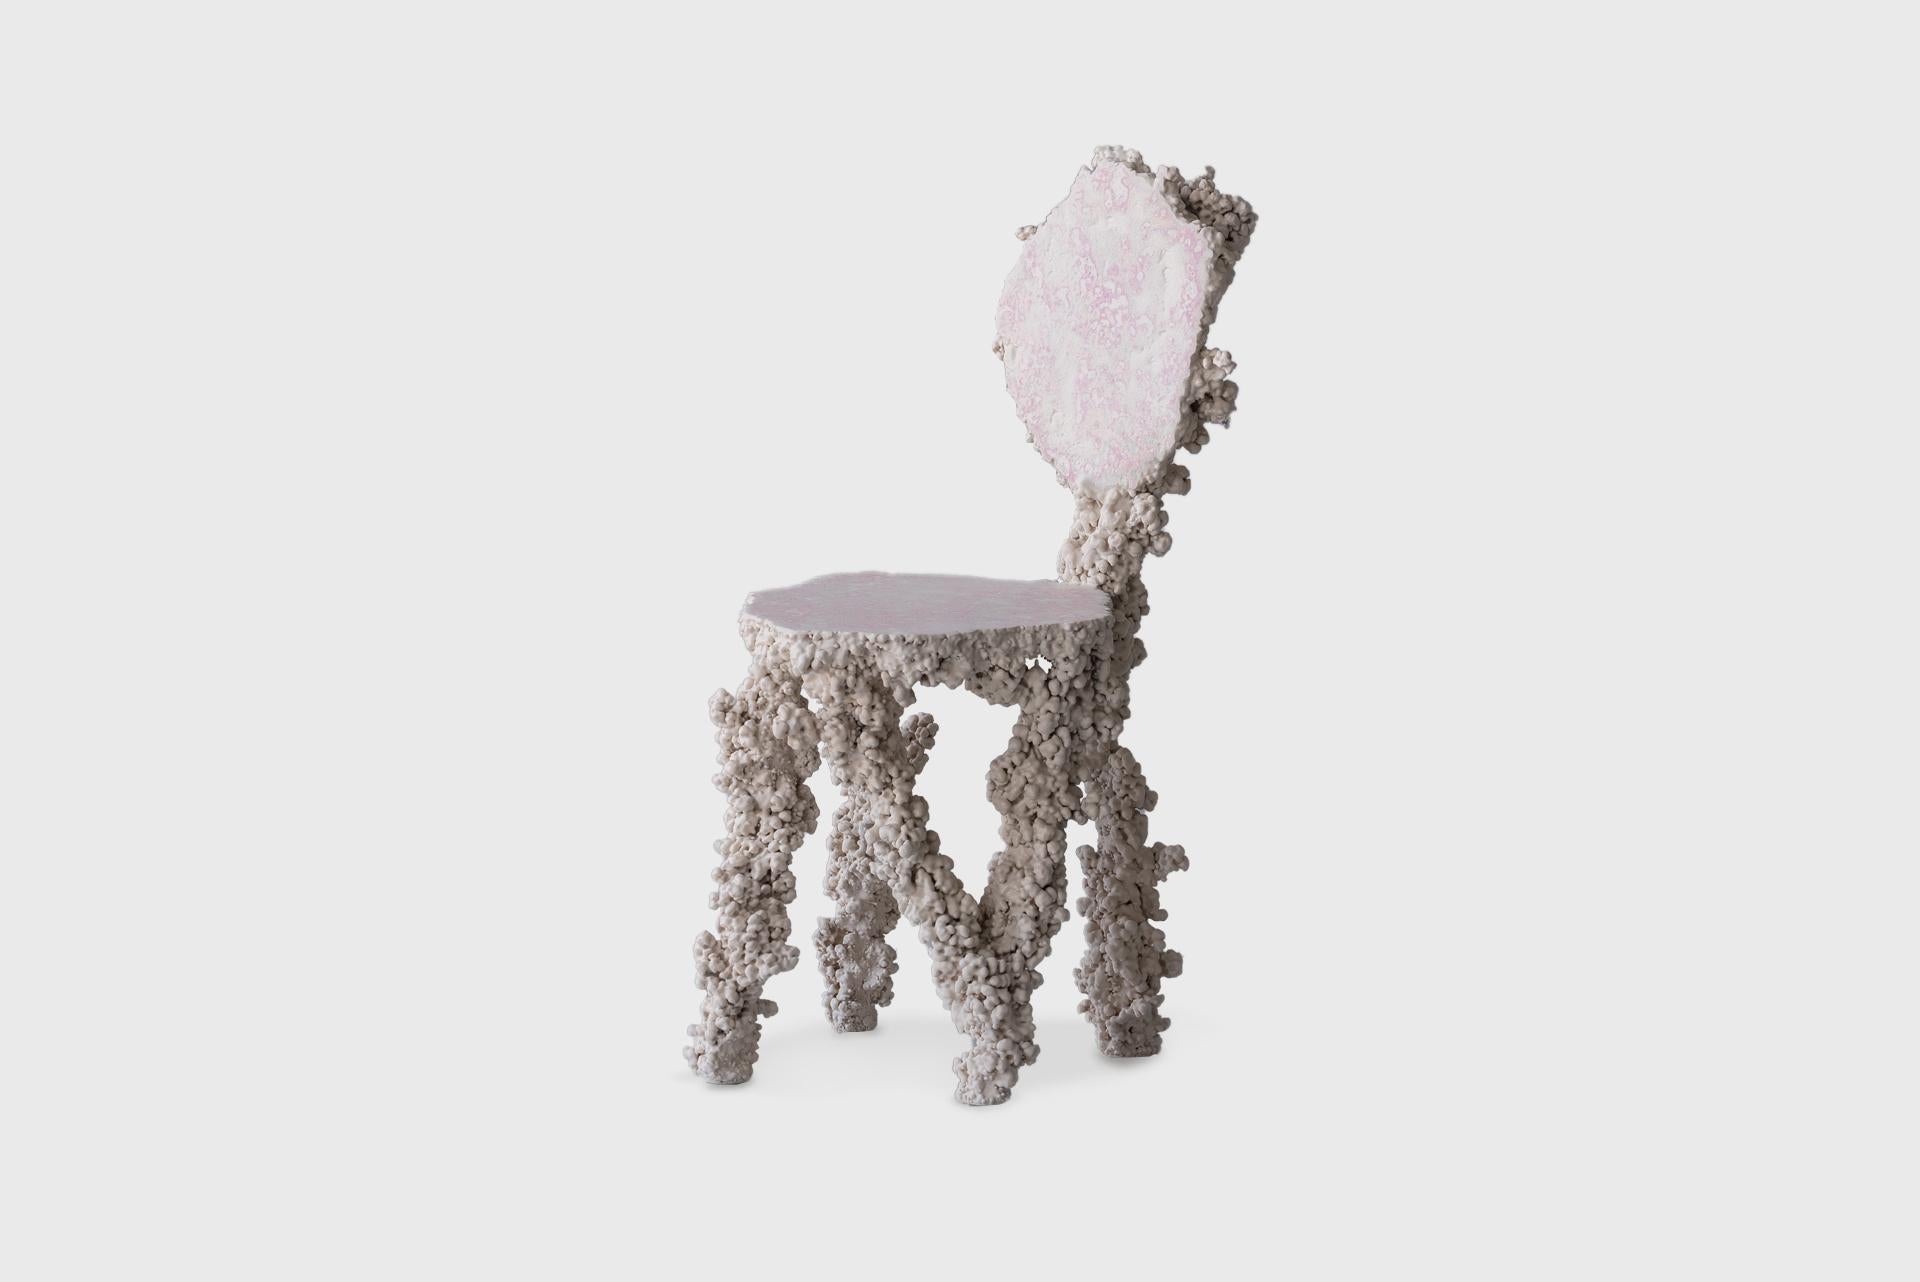 Aluminum Contemporary Chair Epimorph, Recycled Aluminium, Resin, Mineral, Elissa Lacoste For Sale